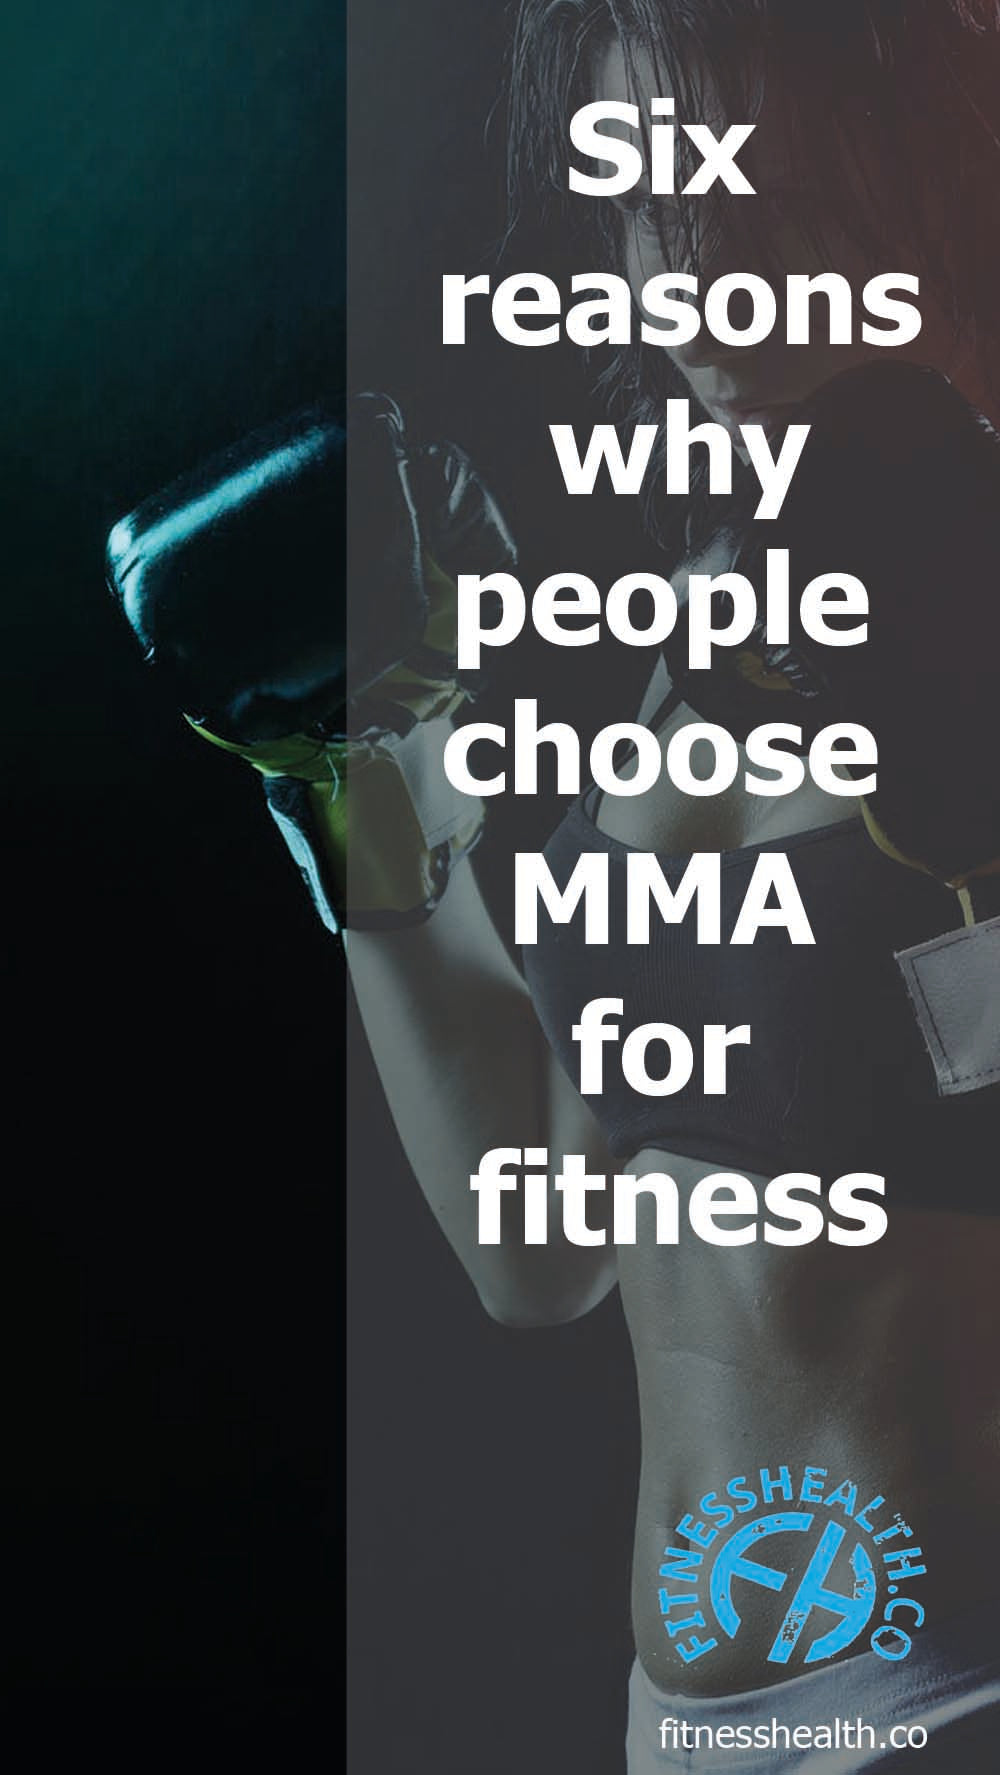 Six reasons why people choose MMA for fitness - Fitness Health 